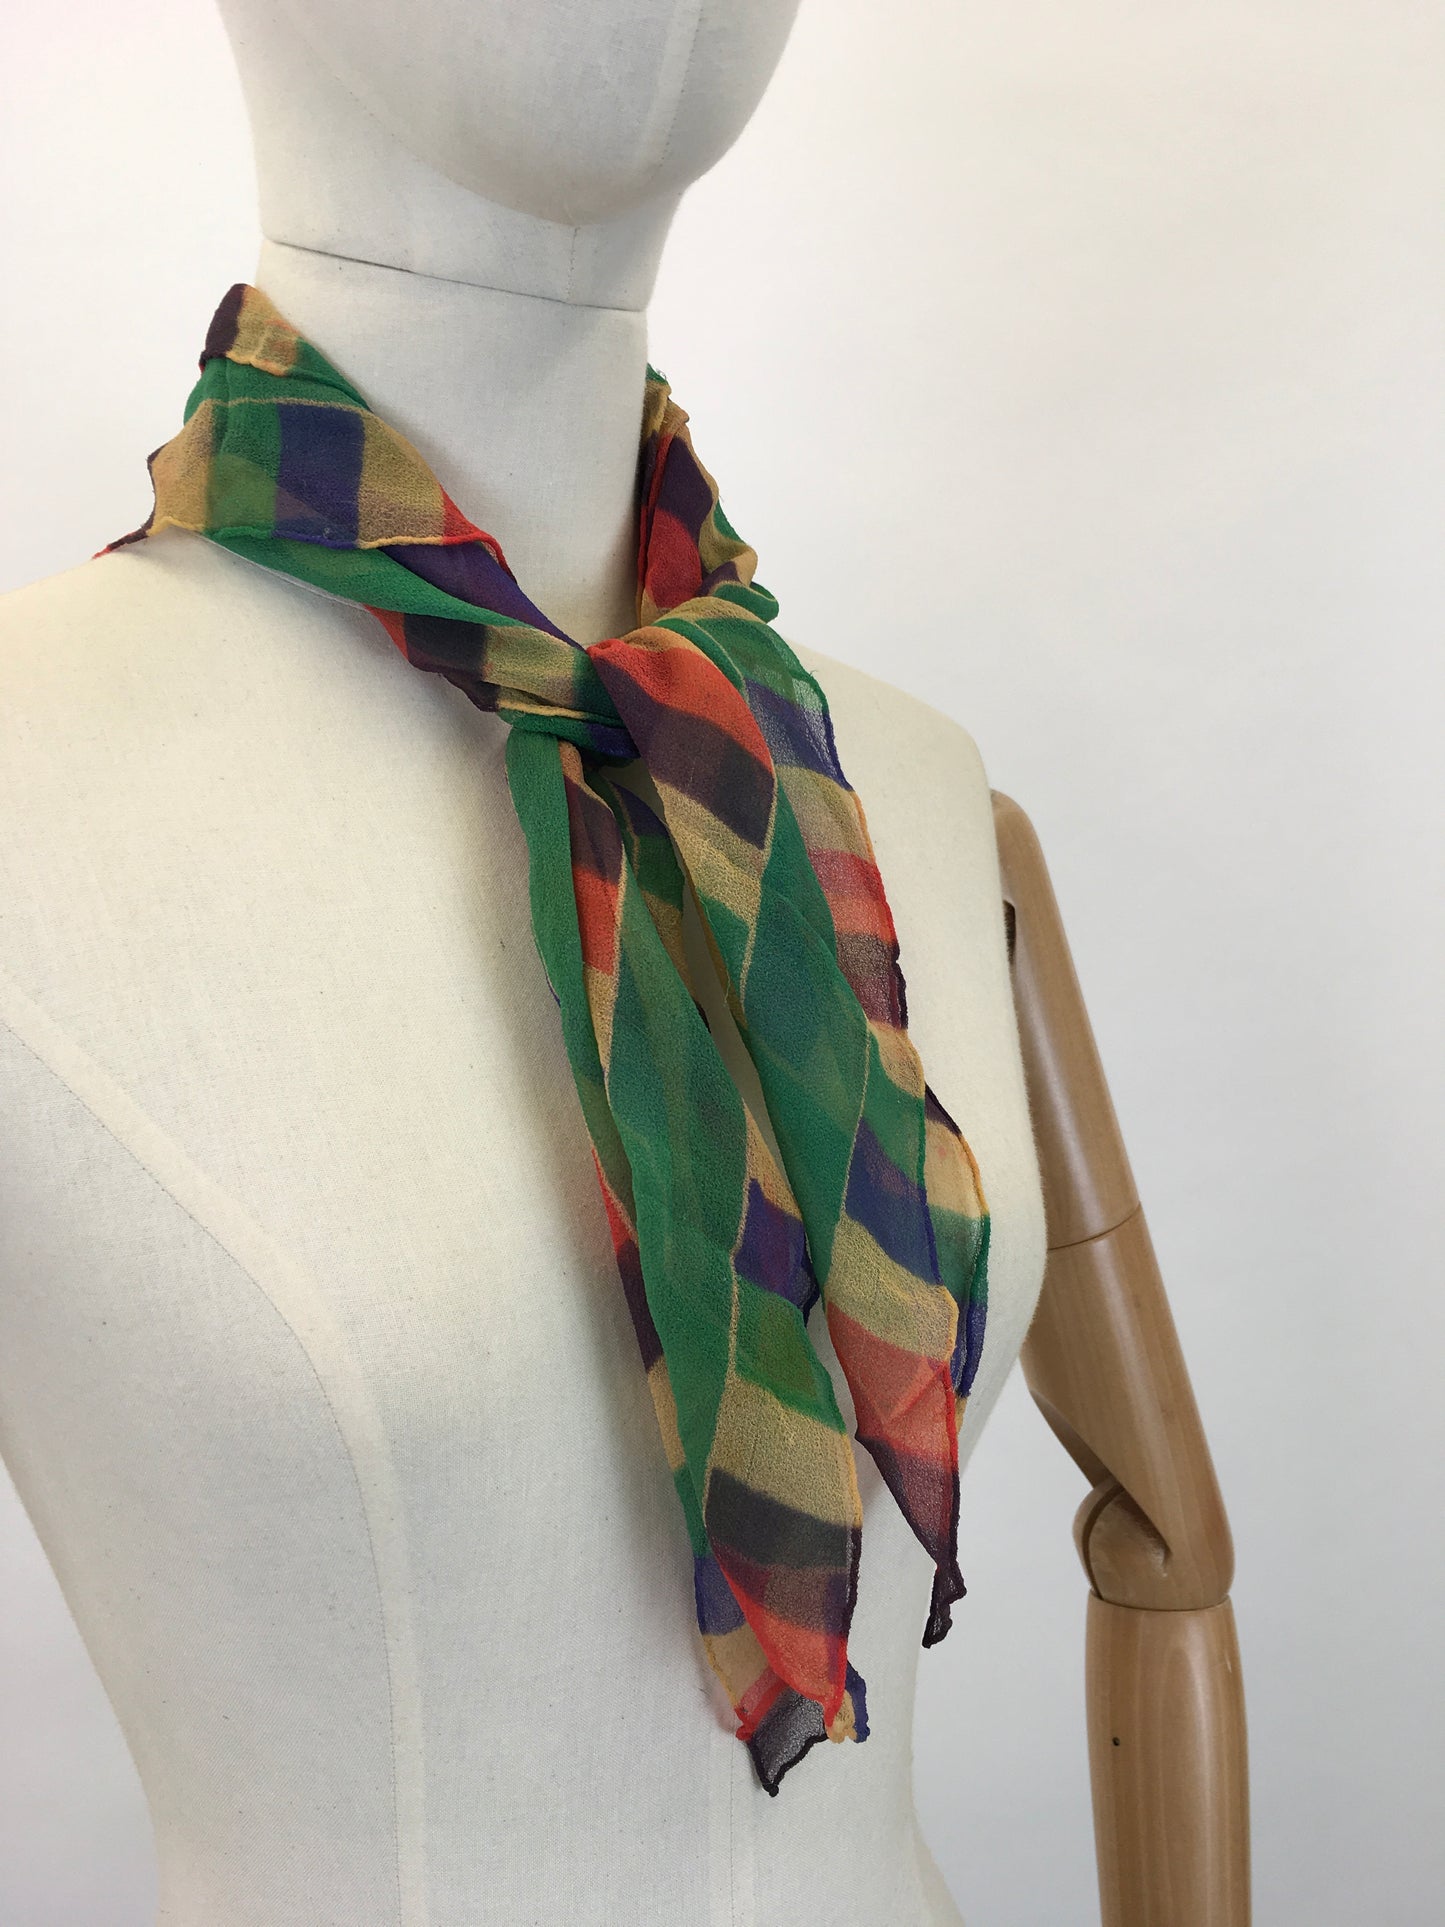 Original 1930's Exquisite Rainbow Chiffon Scarf - In Autumnal Brights of Burnt Orange, Green, Yellow and Blue